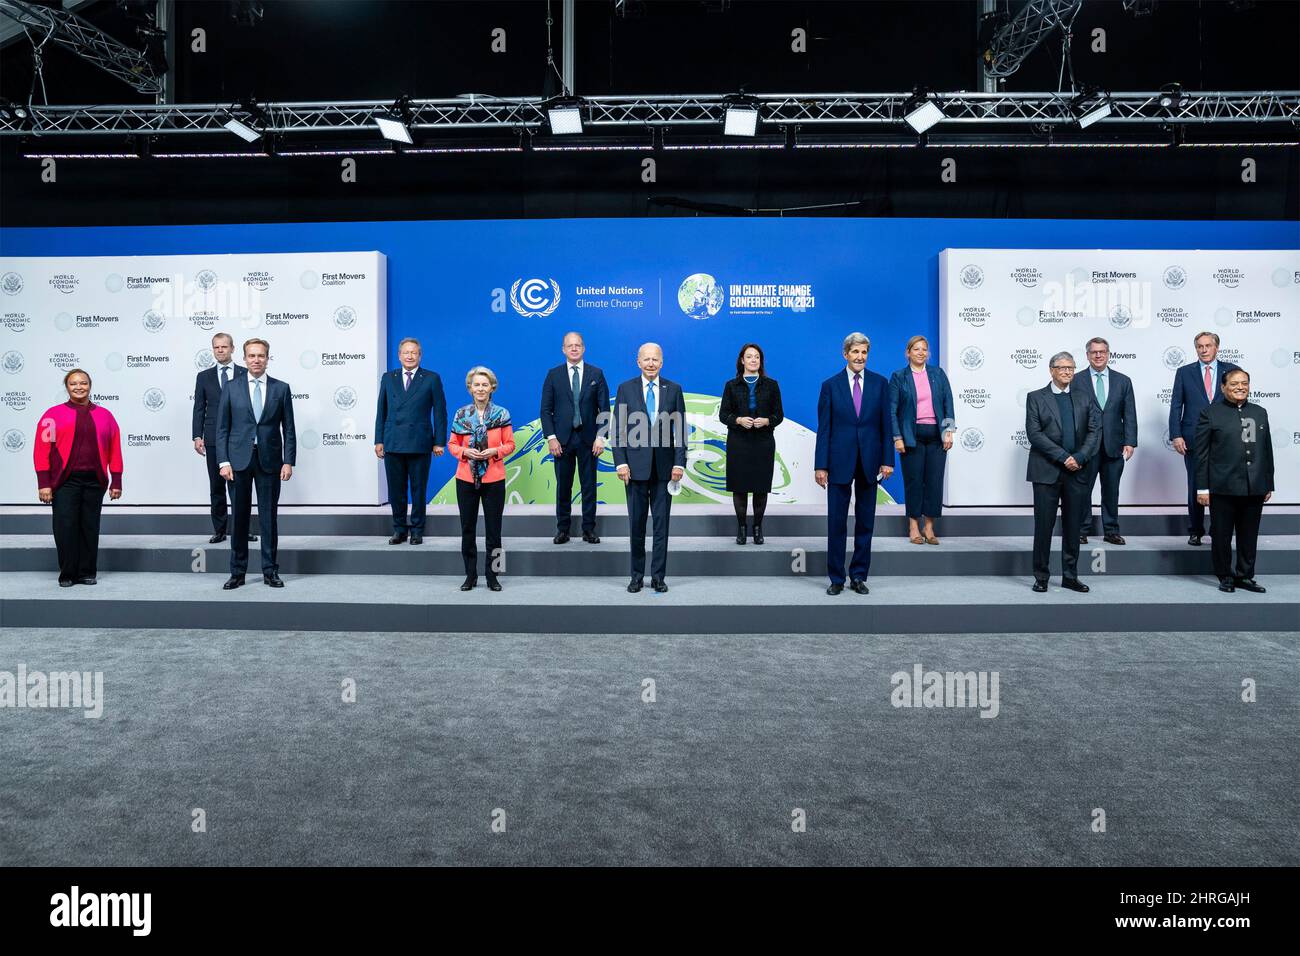 U.S President Joe Biden, center, take a group photo with the First Movers Coalition at the U.N. Climate Change Conference COP26 at the Scottish Event Campus, November 2, 2021 in Glasgow, Scotland. Stock Photo